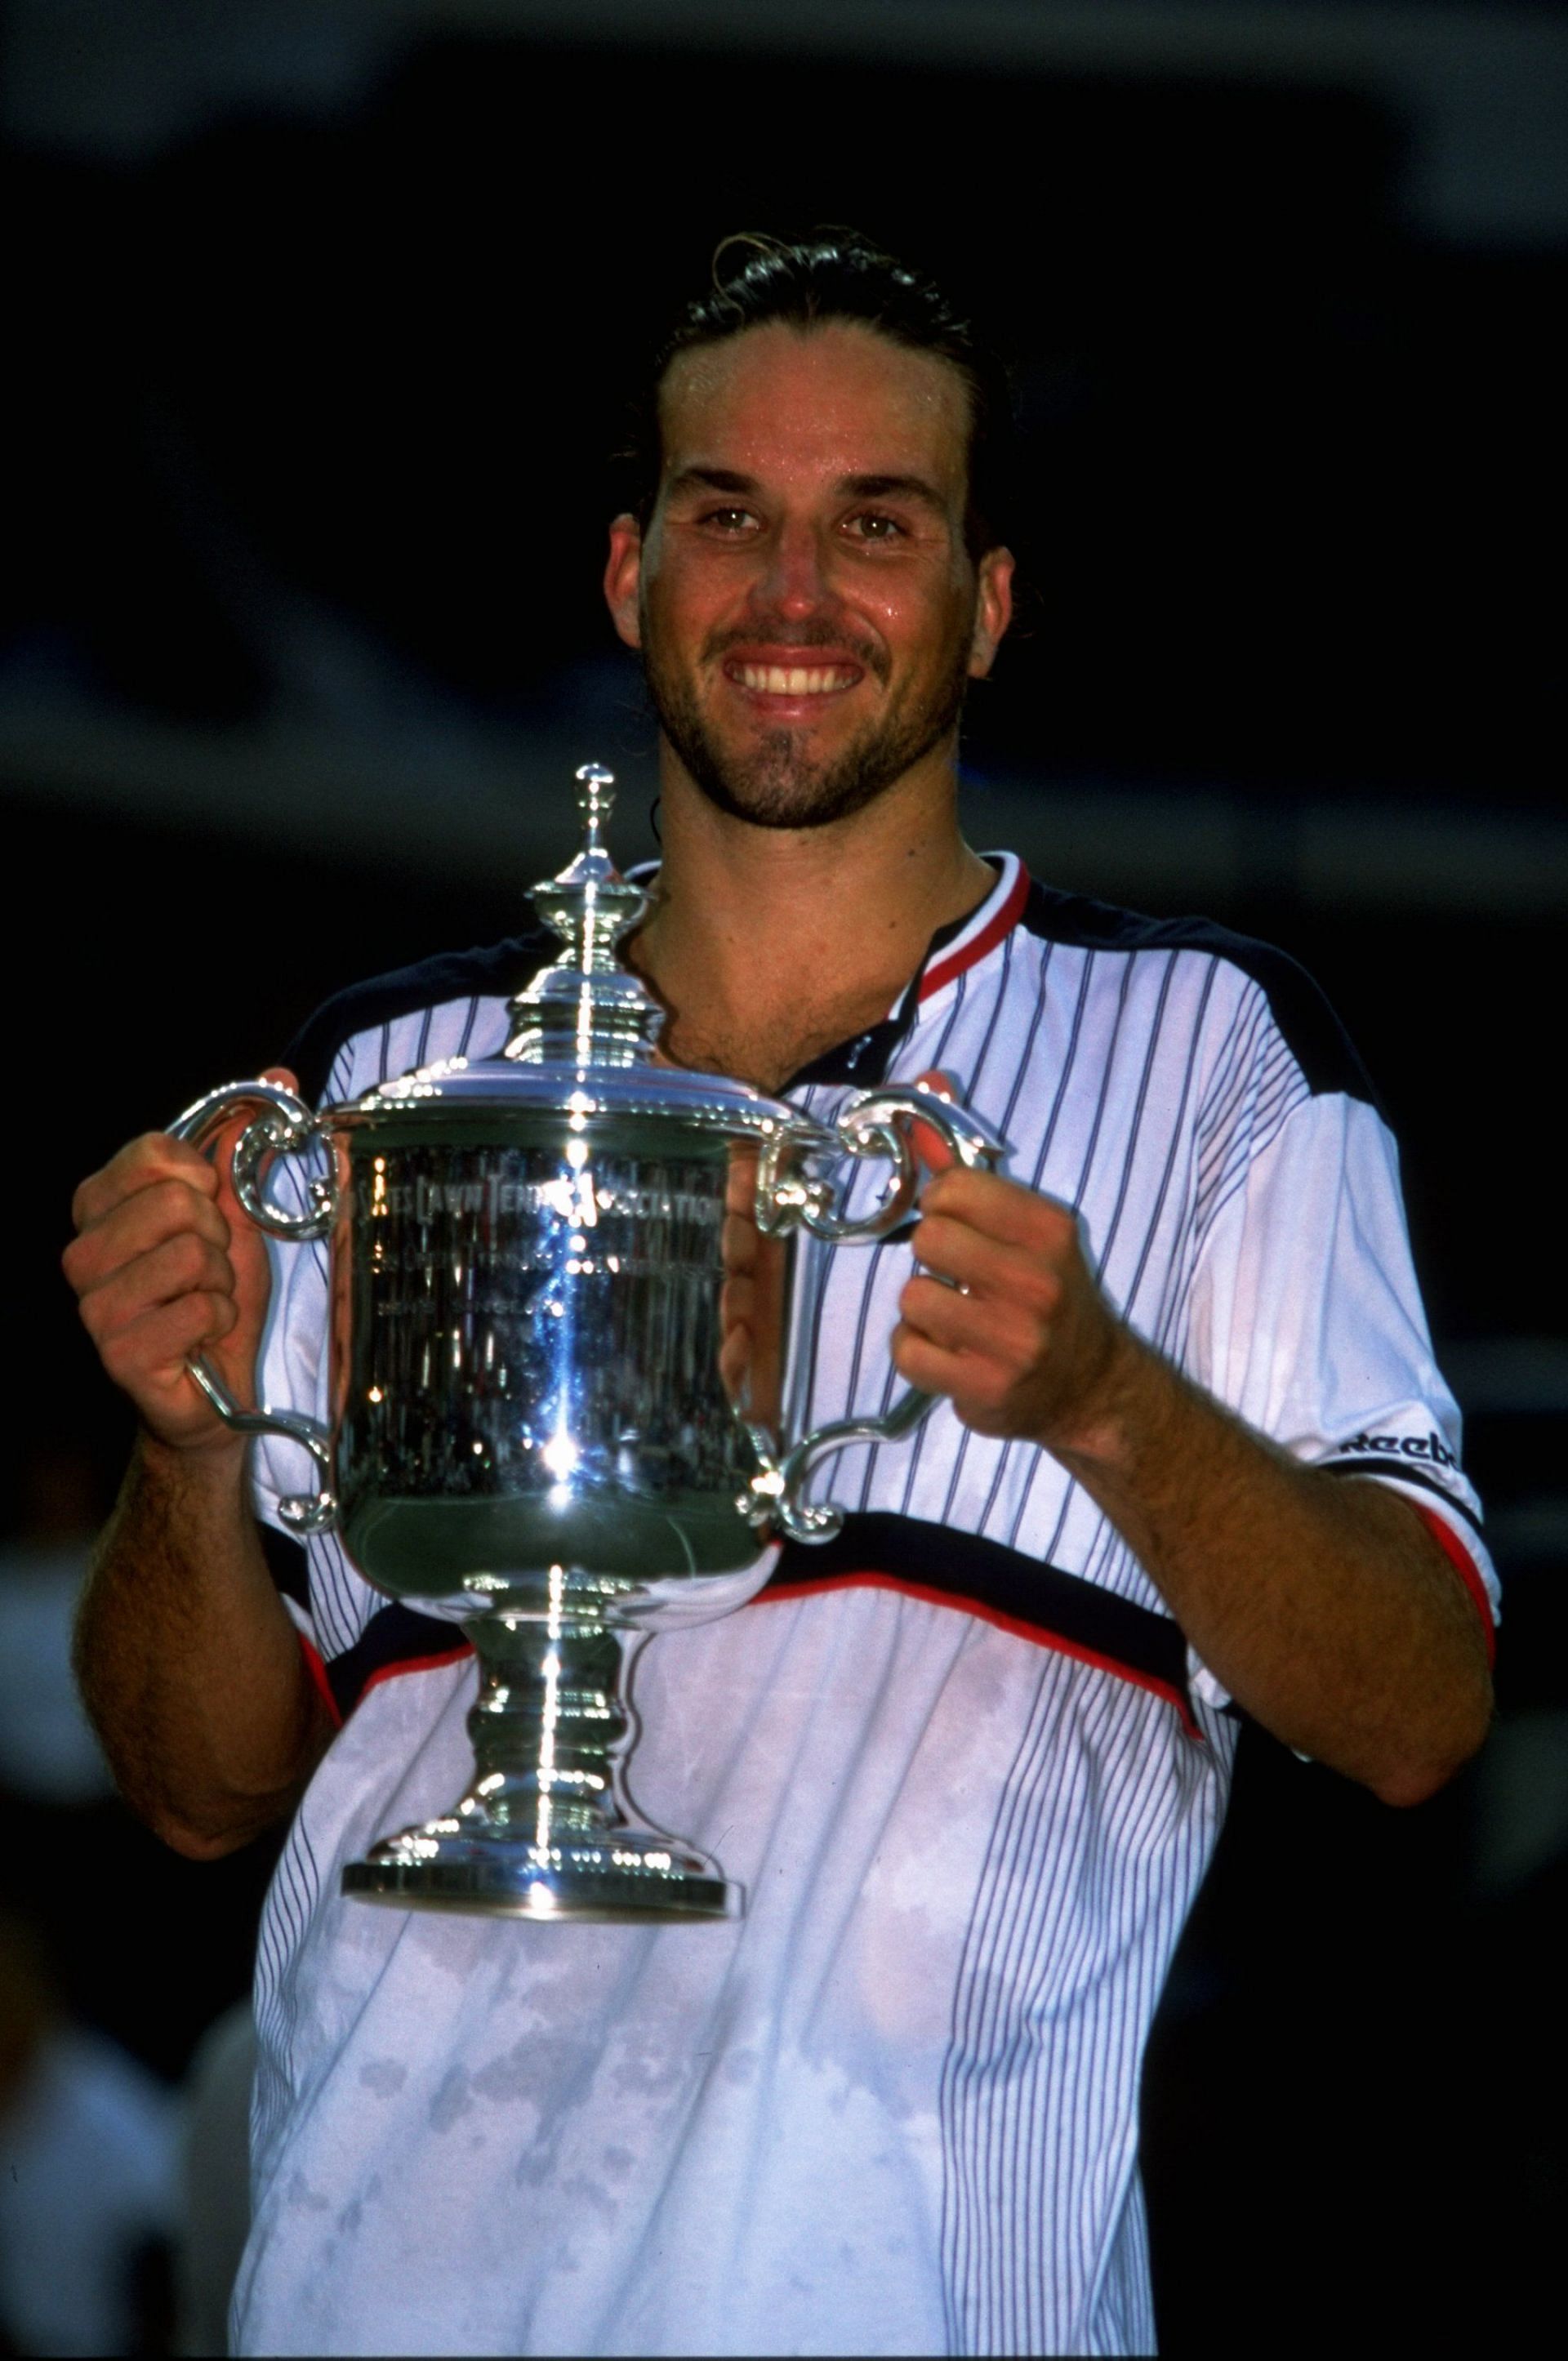 Pat Rafter at the 1998 US Open